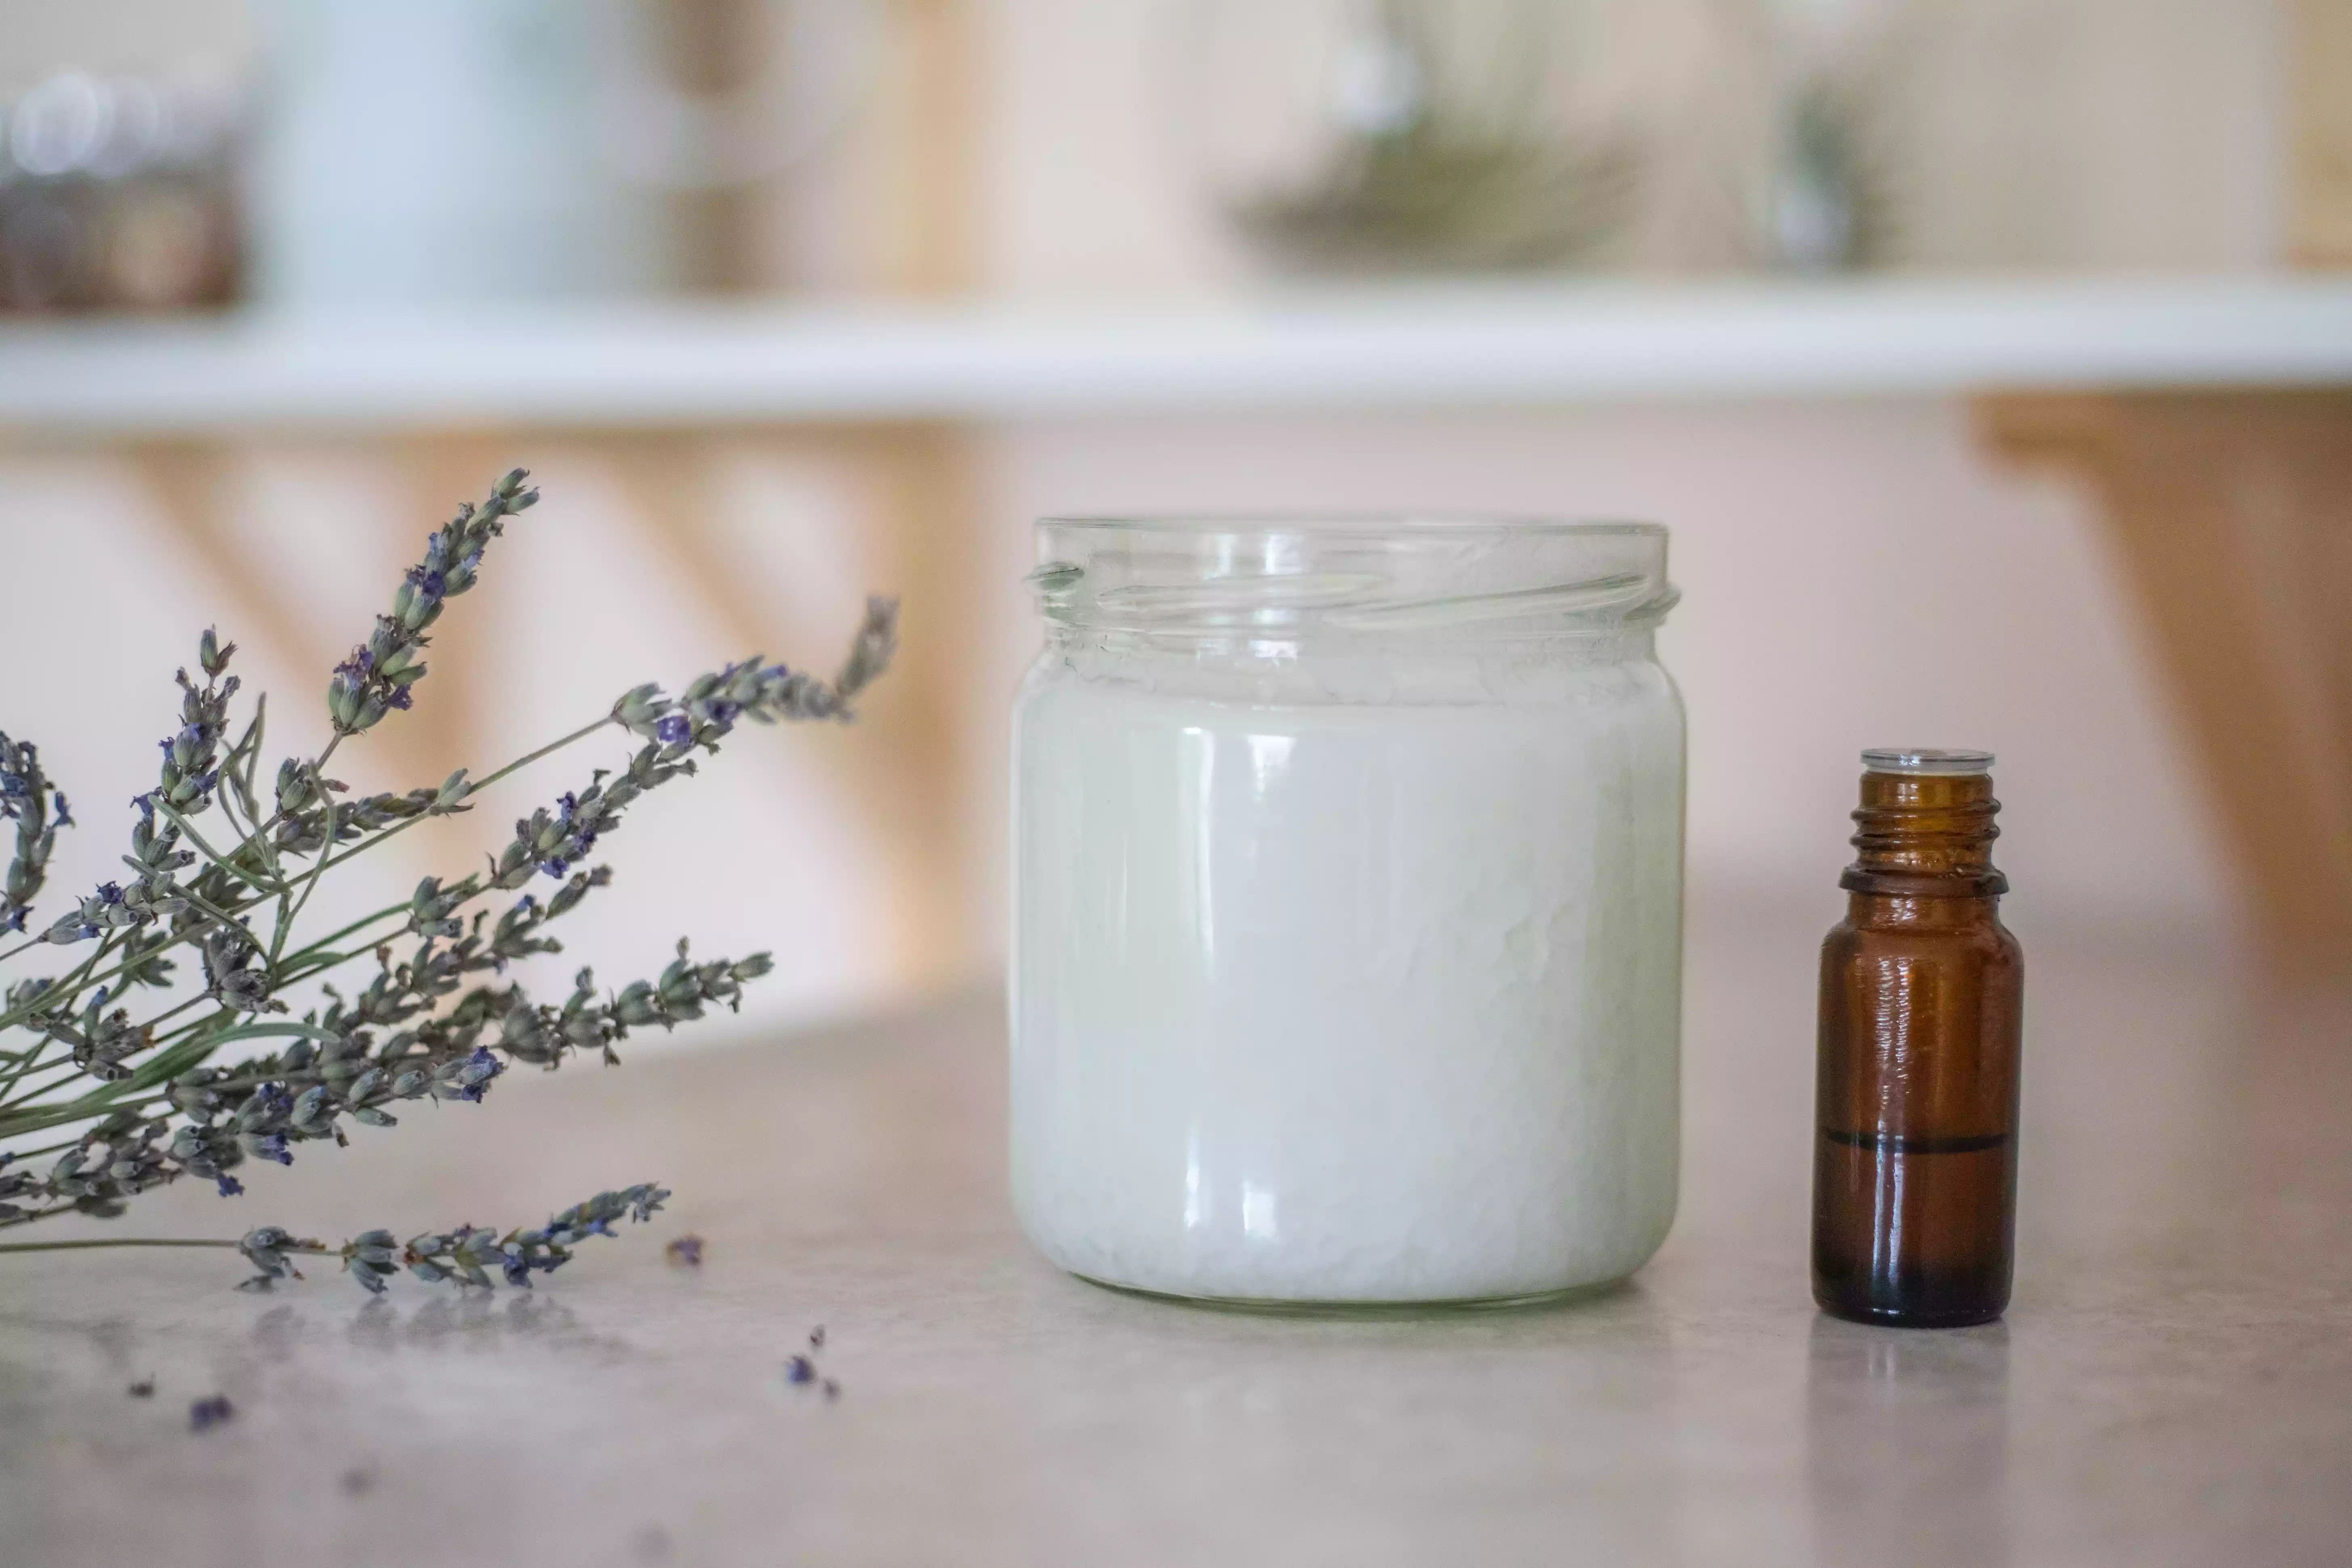 a glass jar of coconut oil next to lavender essential oil and a sprig of dried lavender flowers